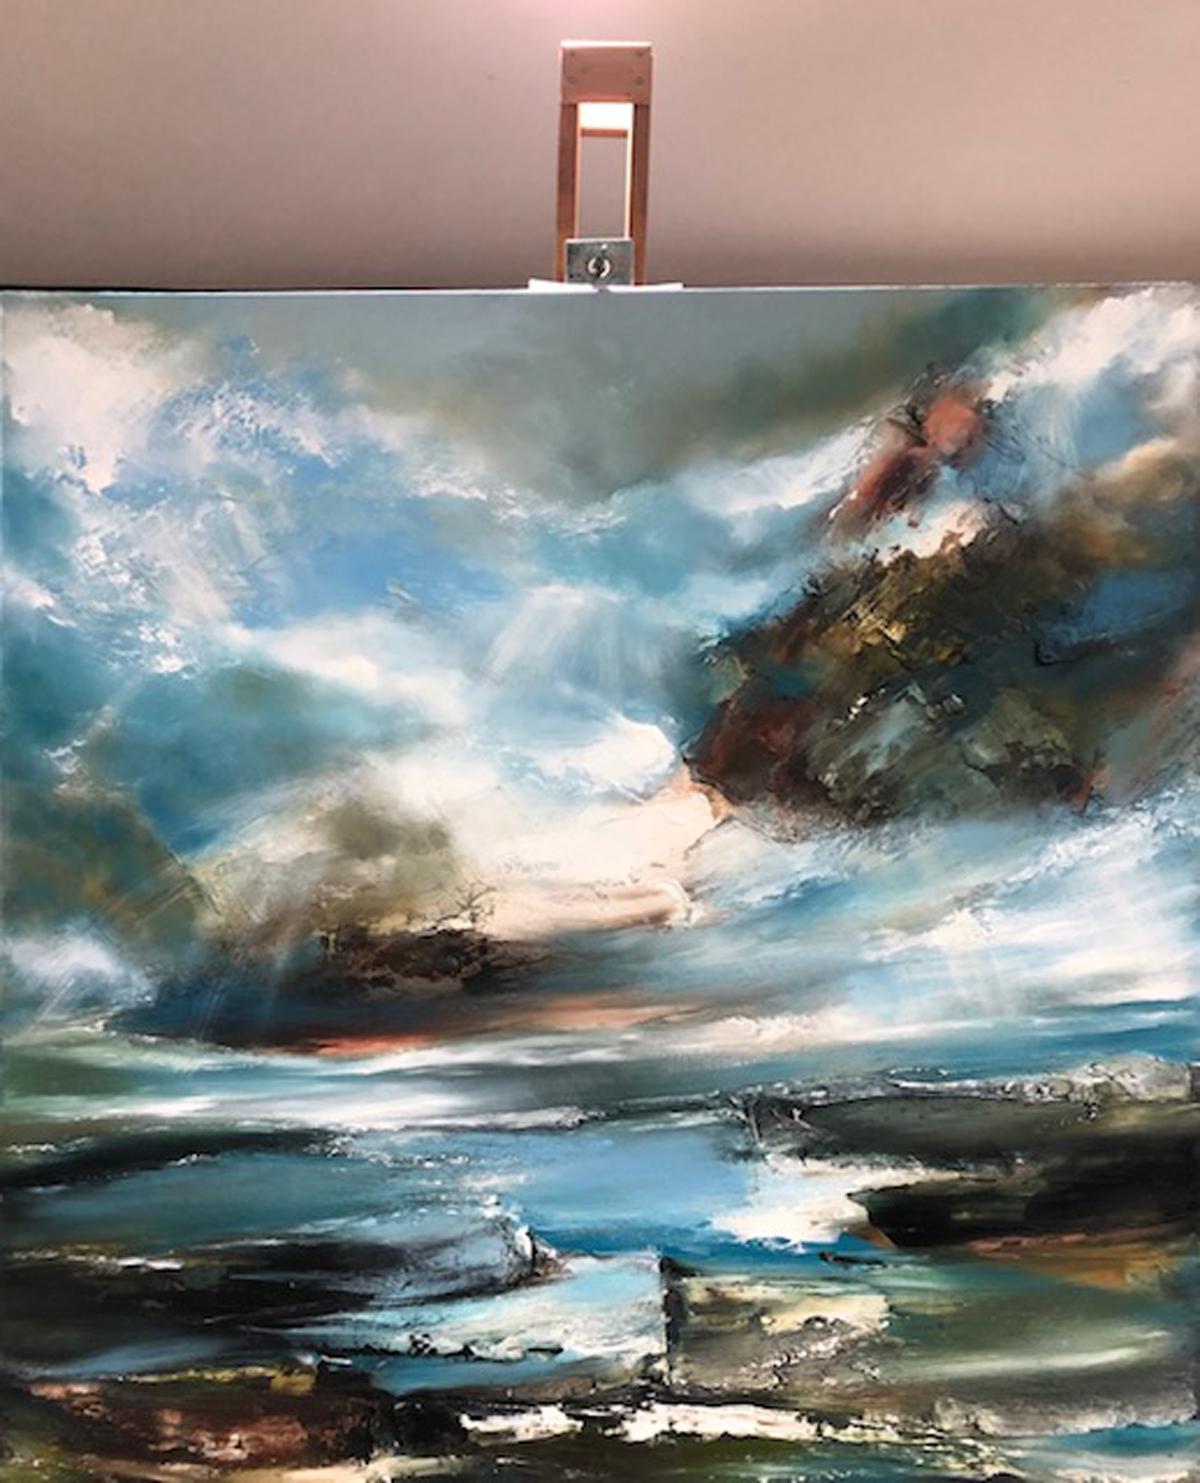 Helen Howells
Coastland
Original Oil Painting on Canvas
Oil Paint on Canvas
Canvas size: H 91cm x W 91cm x D 3.5cm
Sold Unframed
(Please note that in situ images are purely an indication of how a piece may look)

Coastland is an original seascape